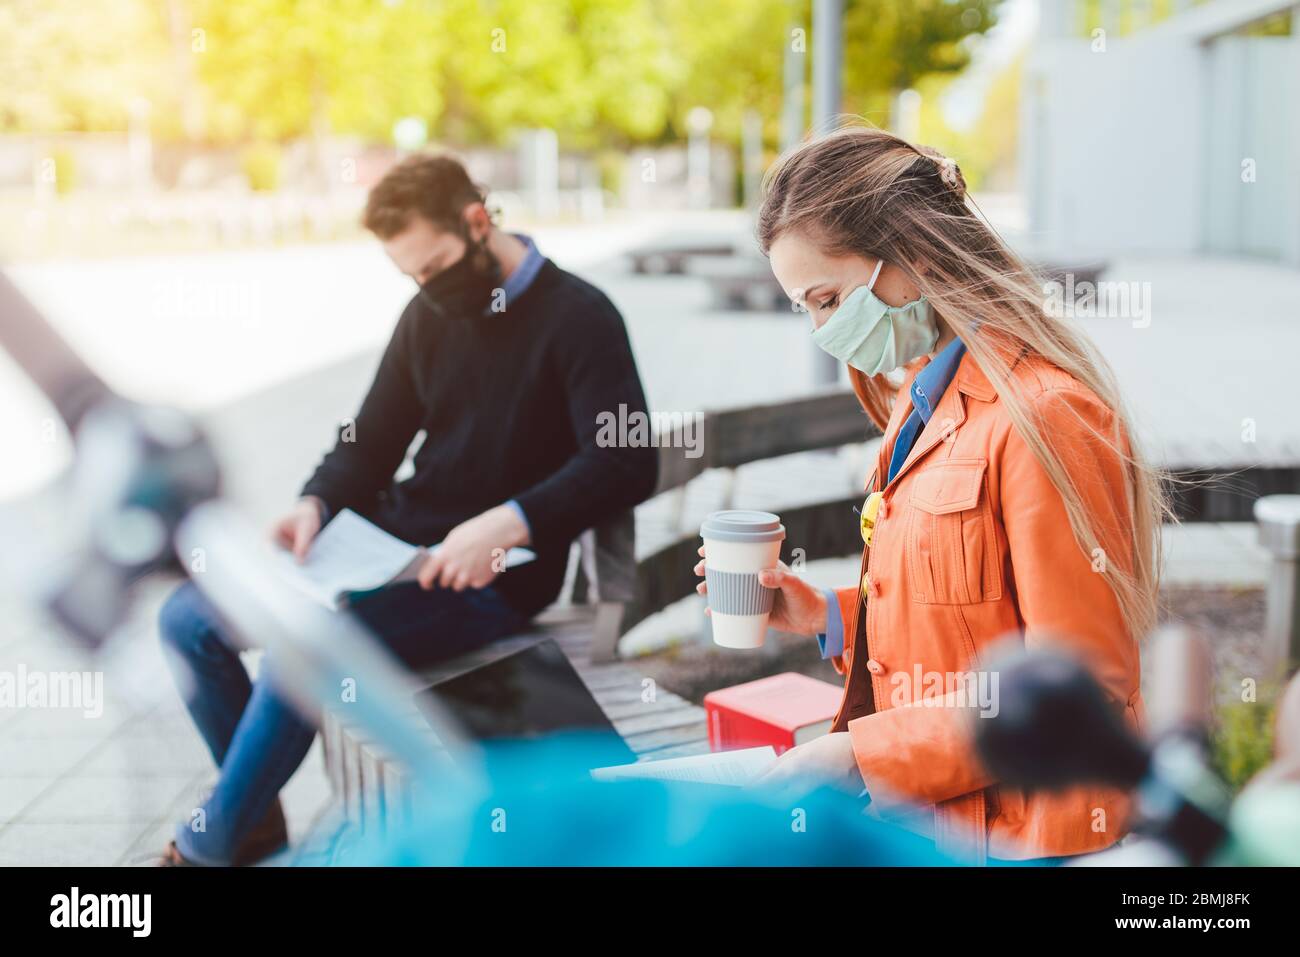 Two college students learning while keeping social distance Stock Photo